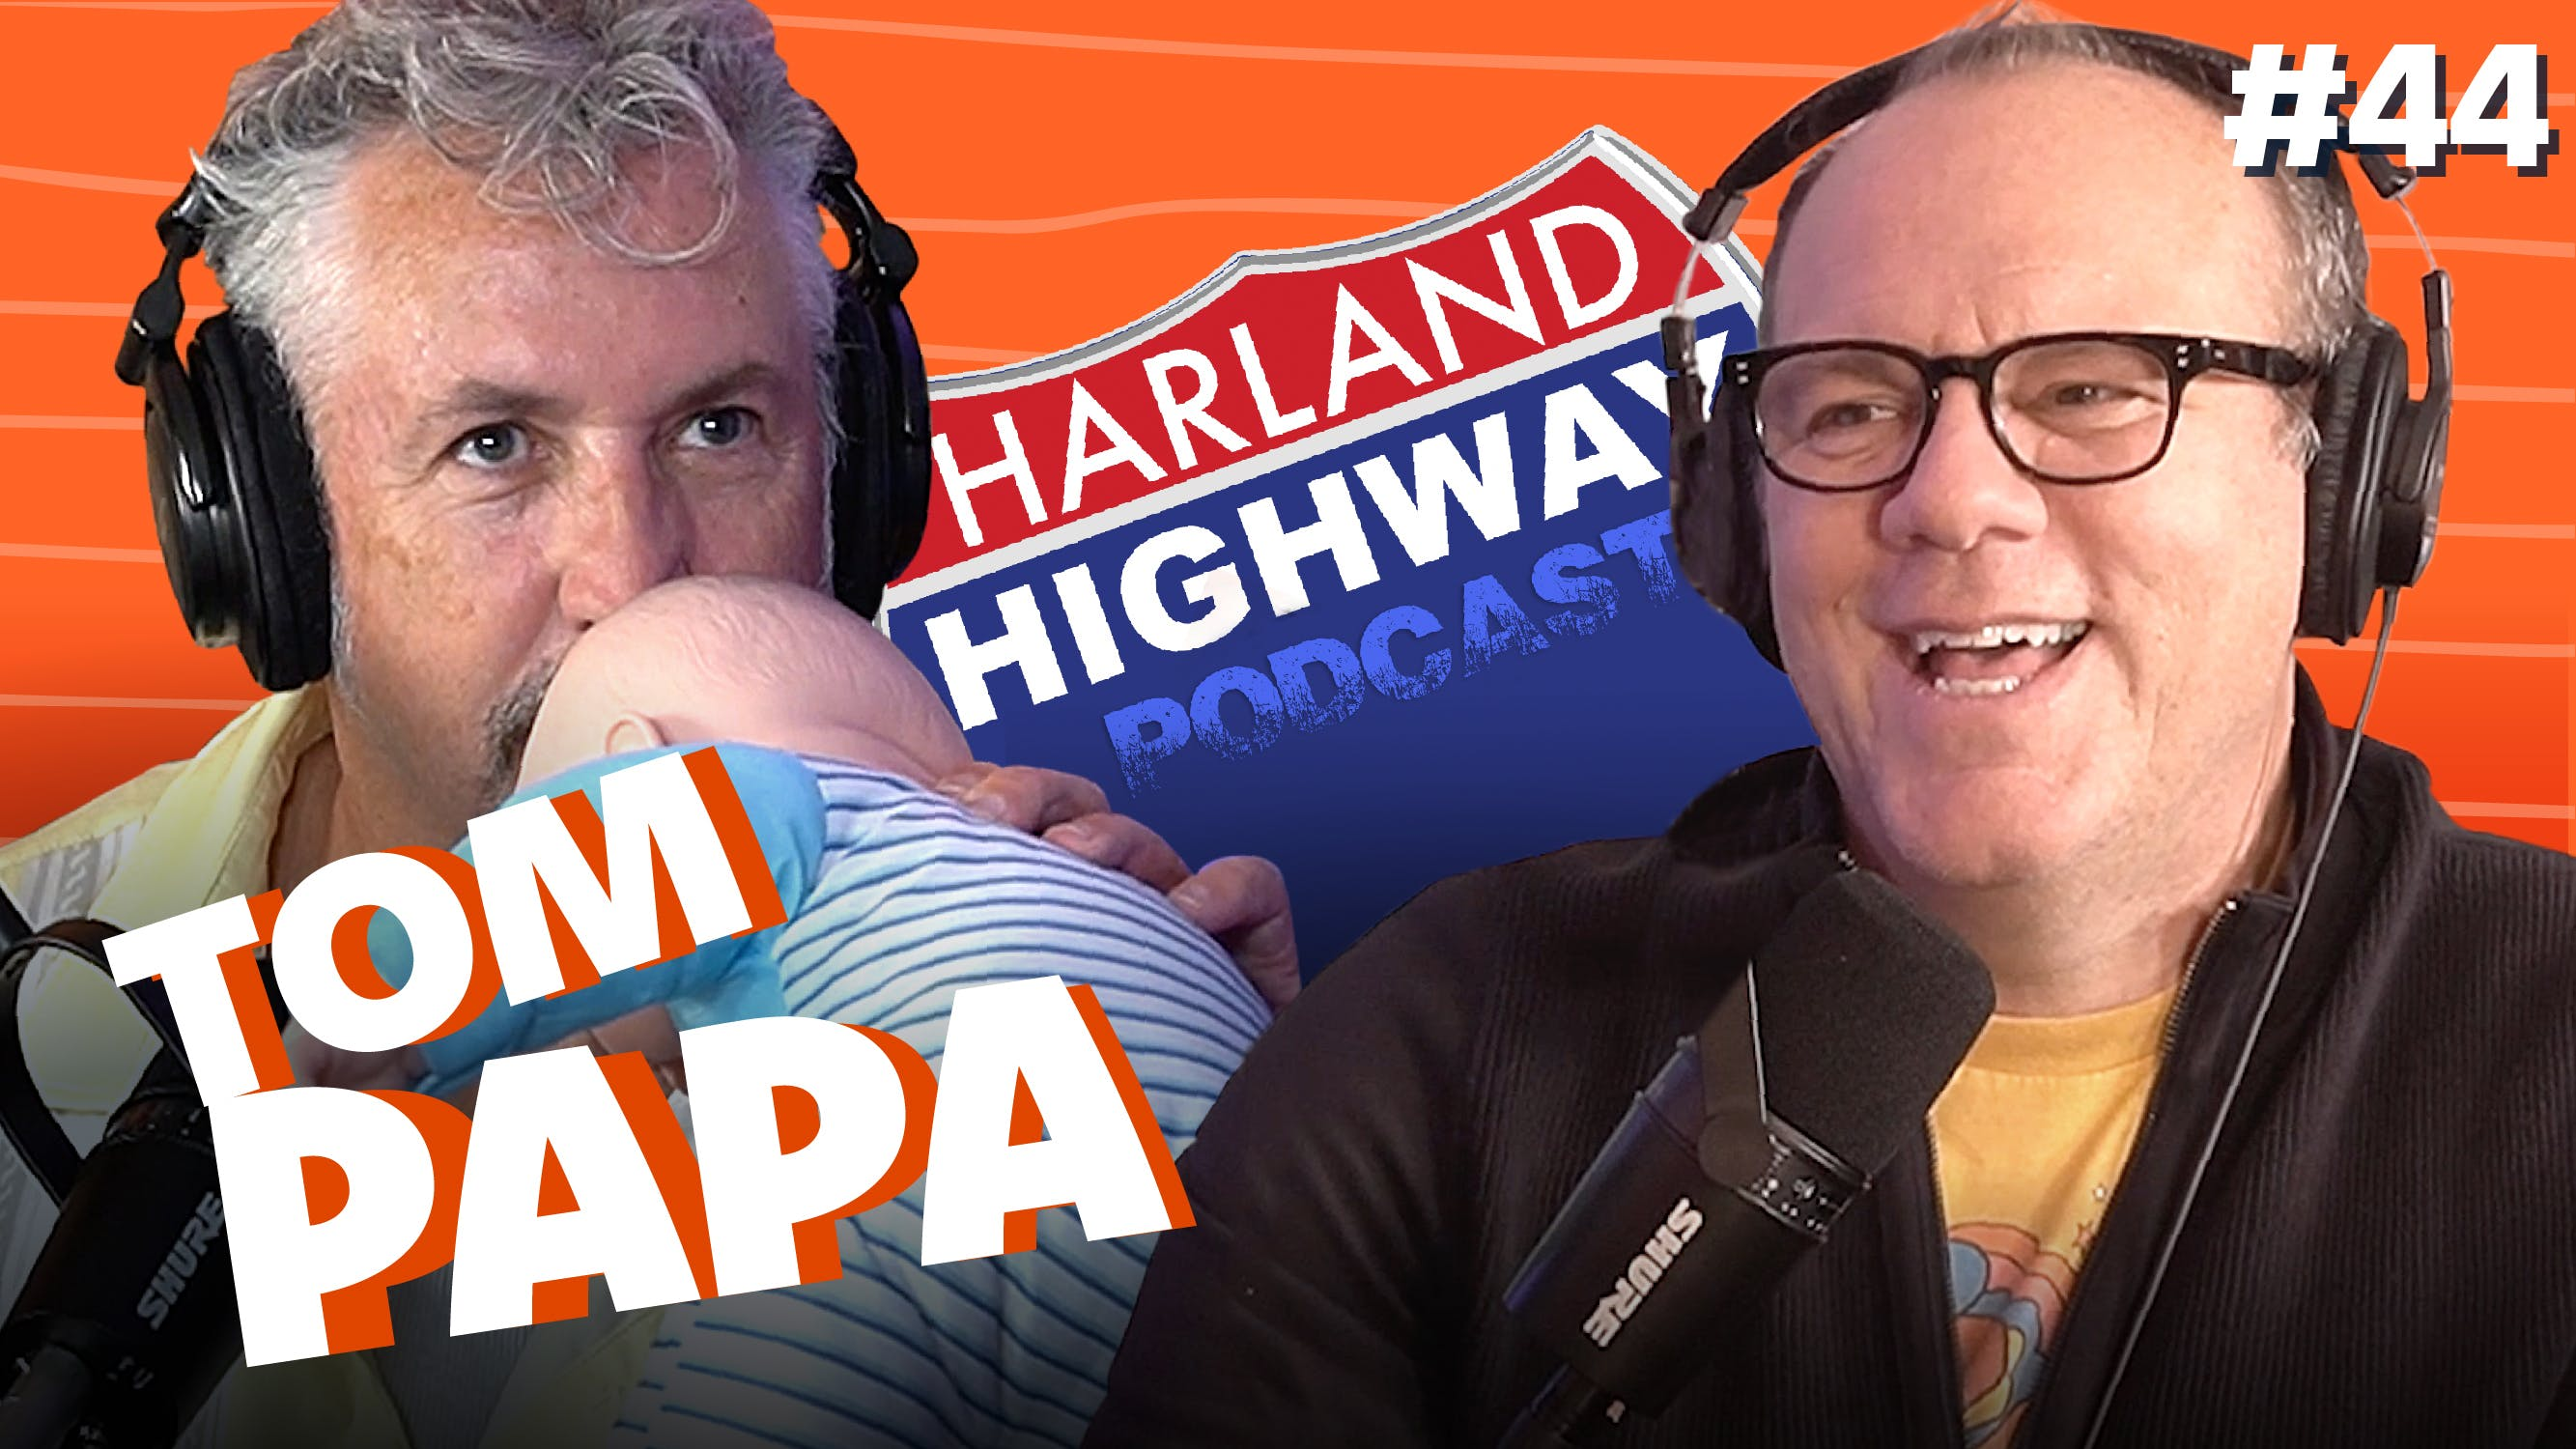 NEW HARLAND HIGHWAY #44 - TOM POPPA, Comedian, Actor, Podcaster